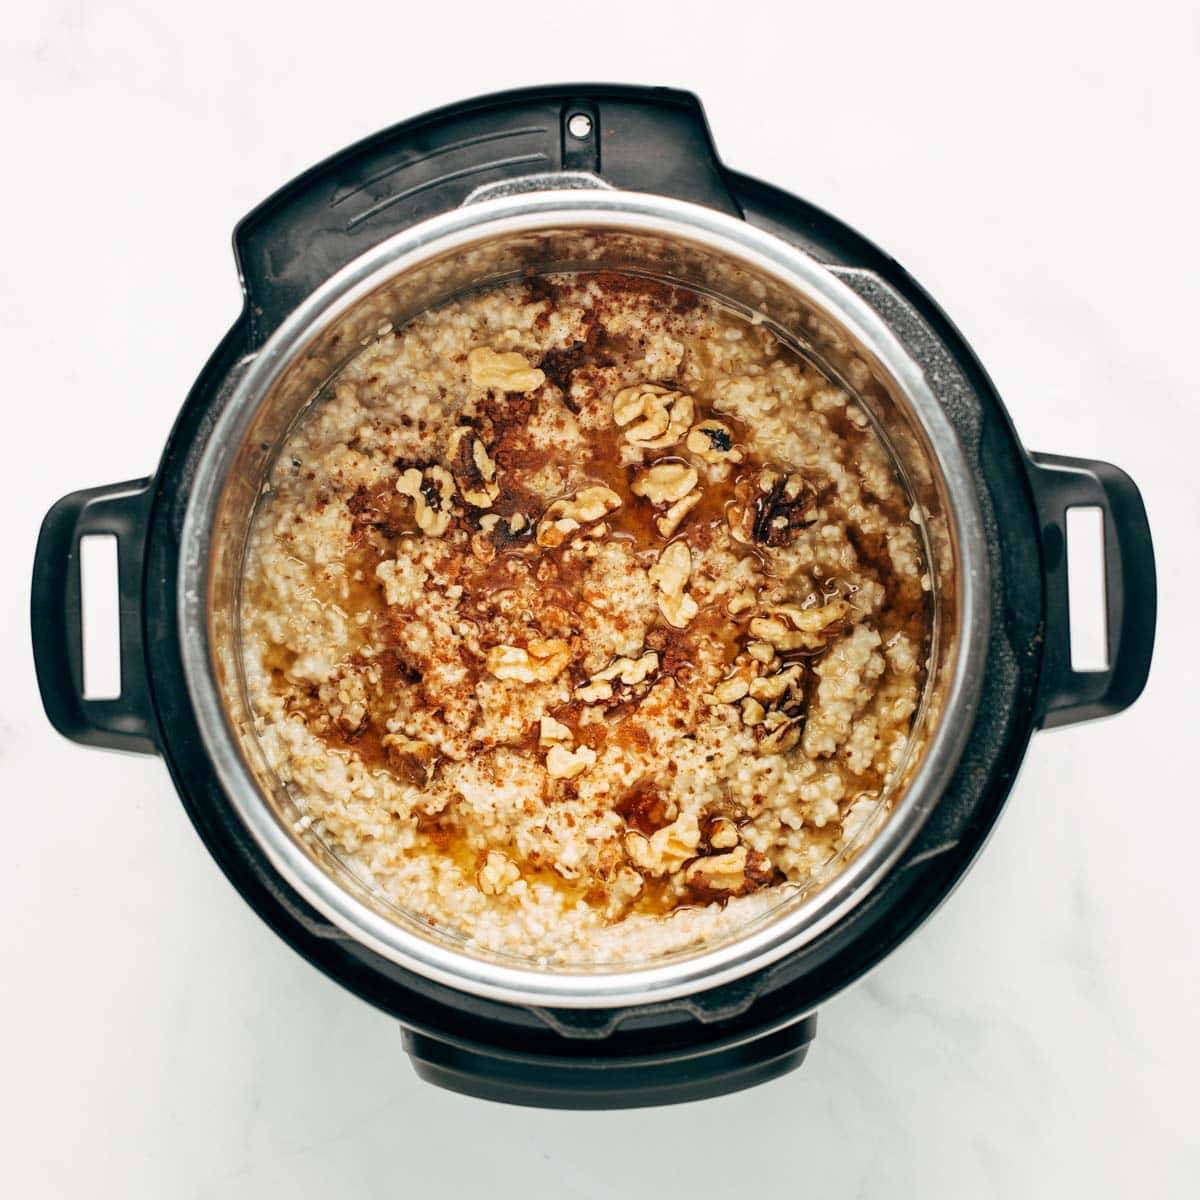 Oatmeal in the Instant Pot.